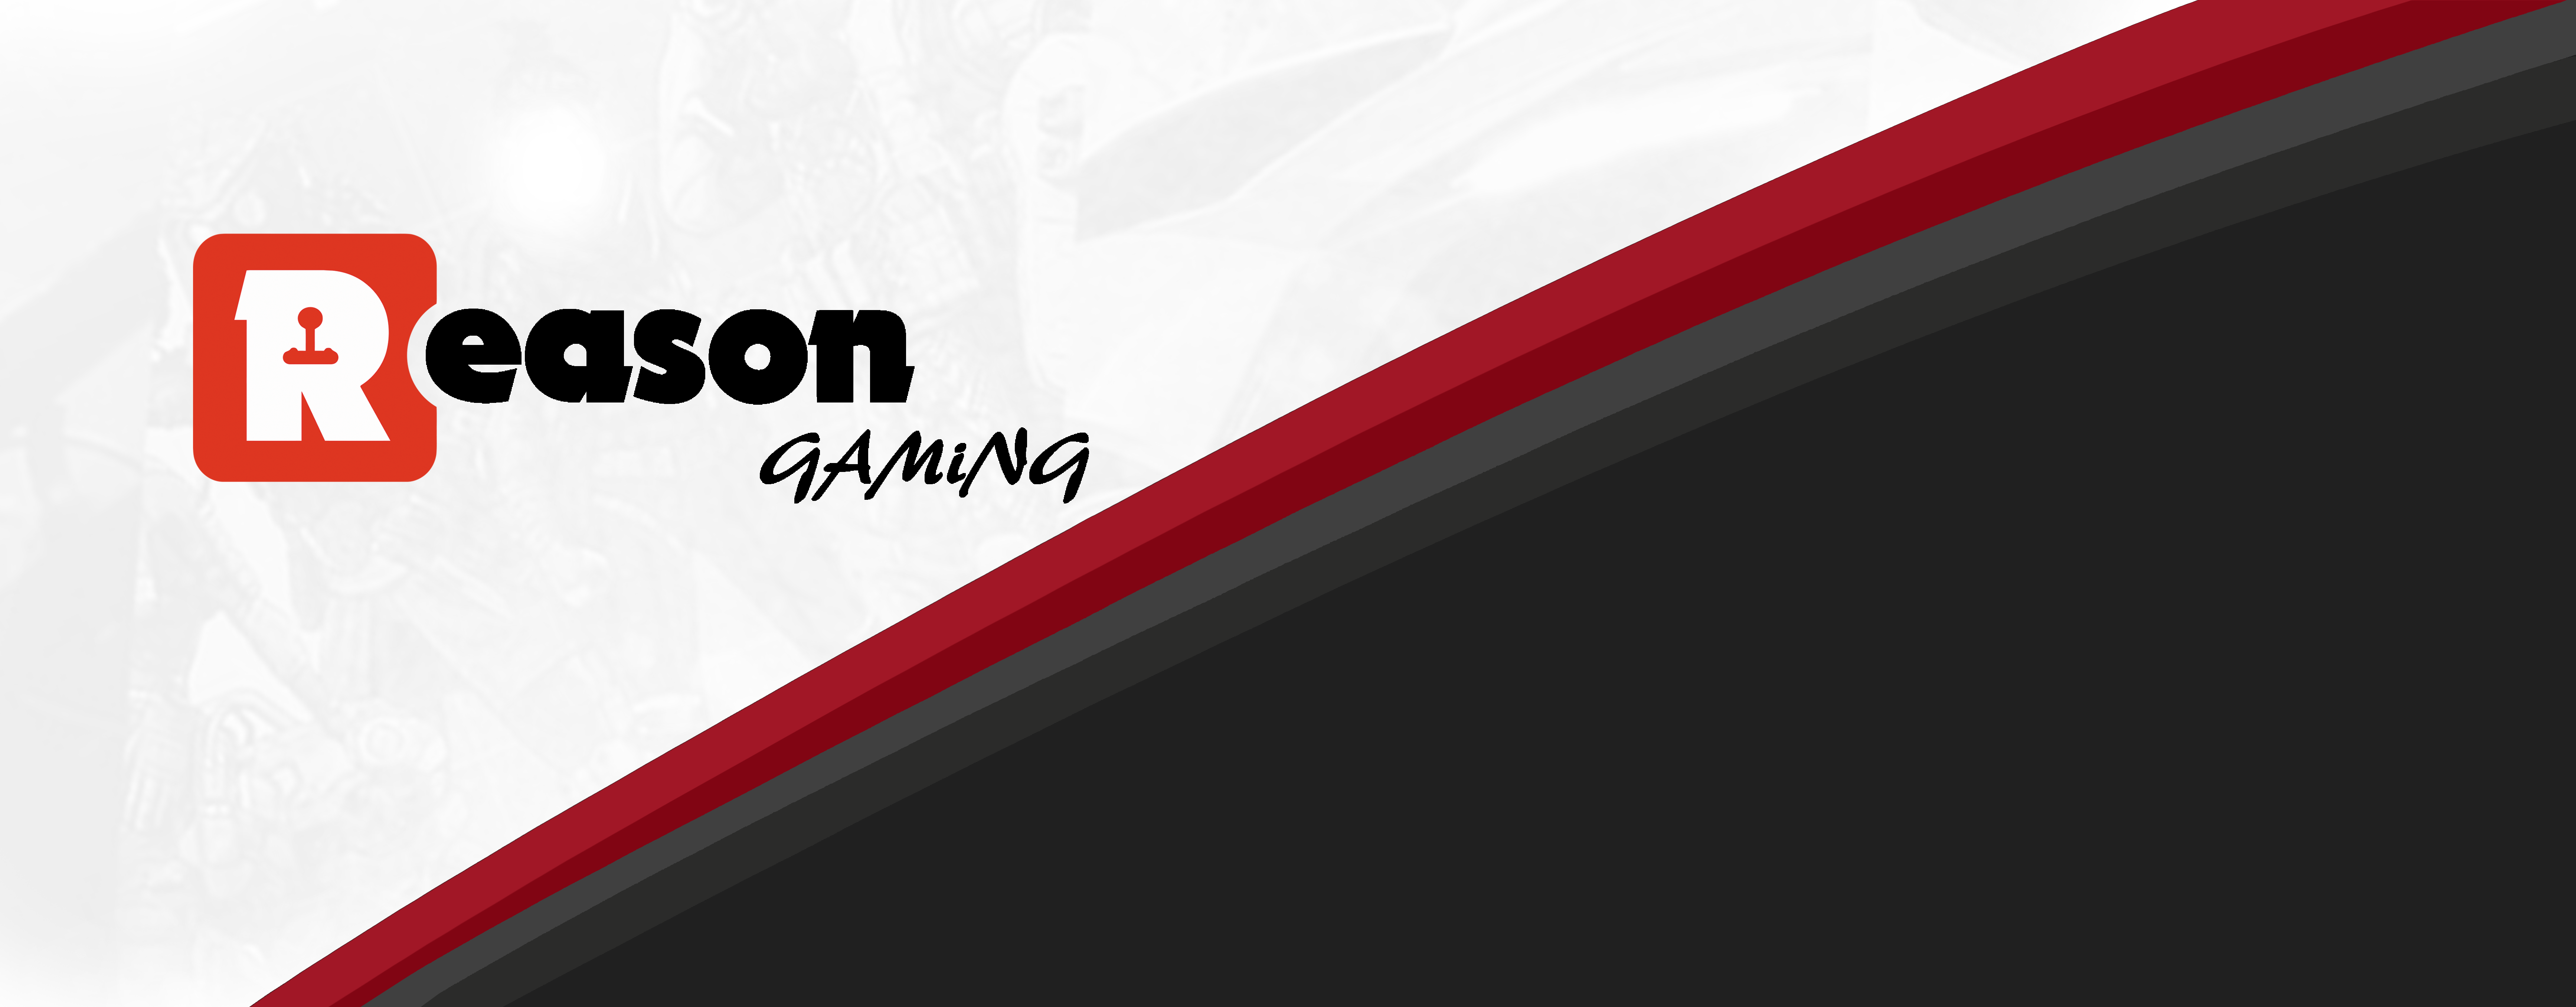 The new faces of Reason Gaming